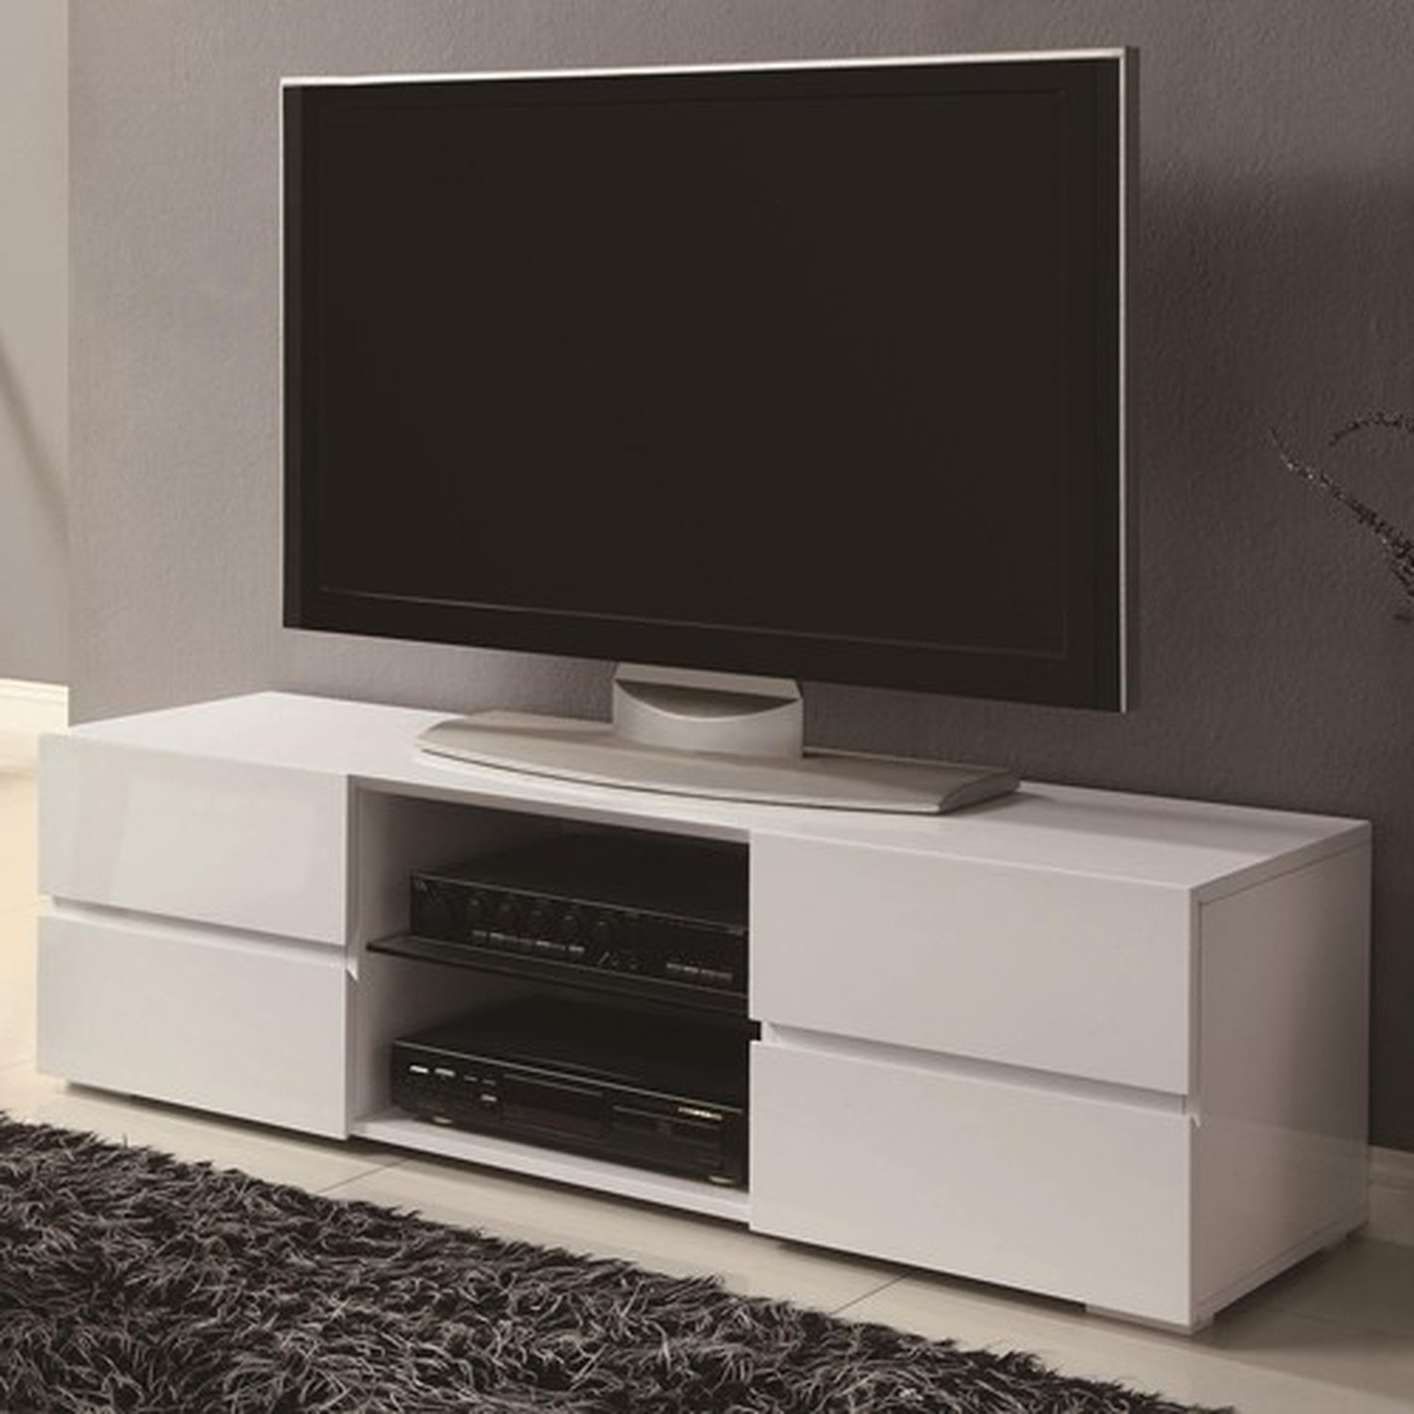 White Wood Tv Stand – Steal A Sofa Furniture Outlet Los Angeles Ca Throughout White Wood Tv Stands (View 1 of 15)